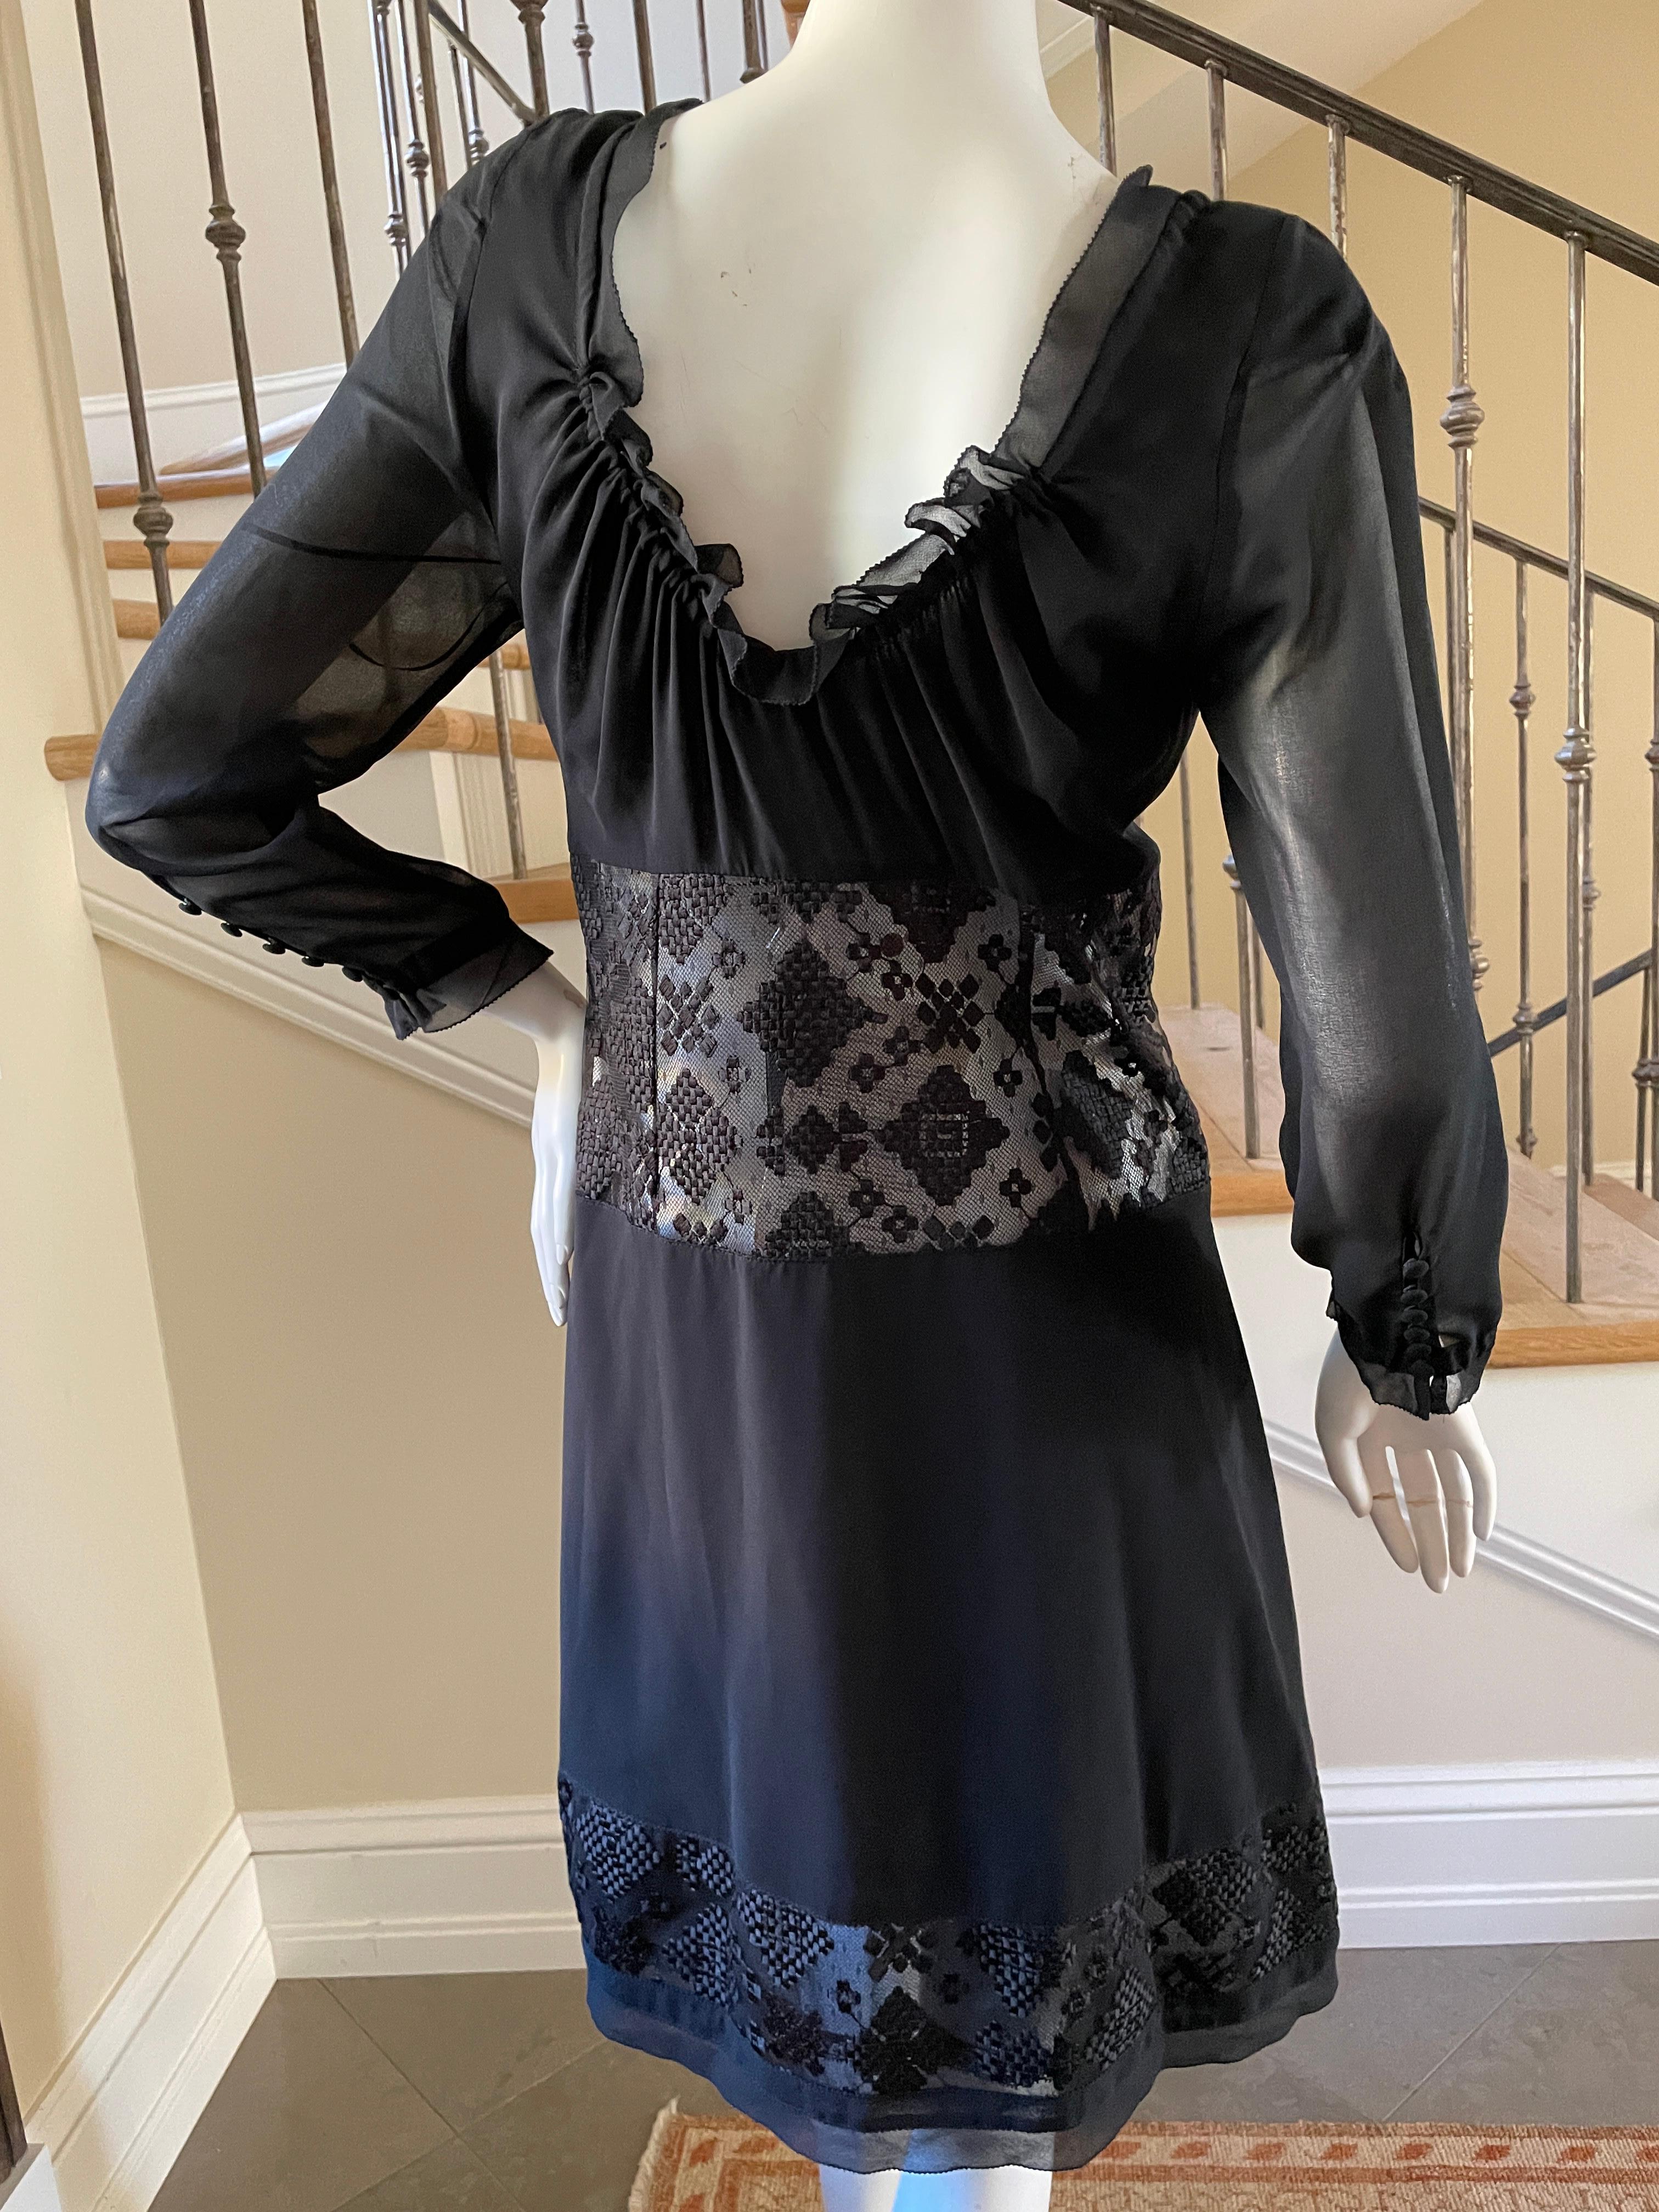 Just Cavalli Little Black Dress by Roberto Cavalli with Sheer Details For Sale 3